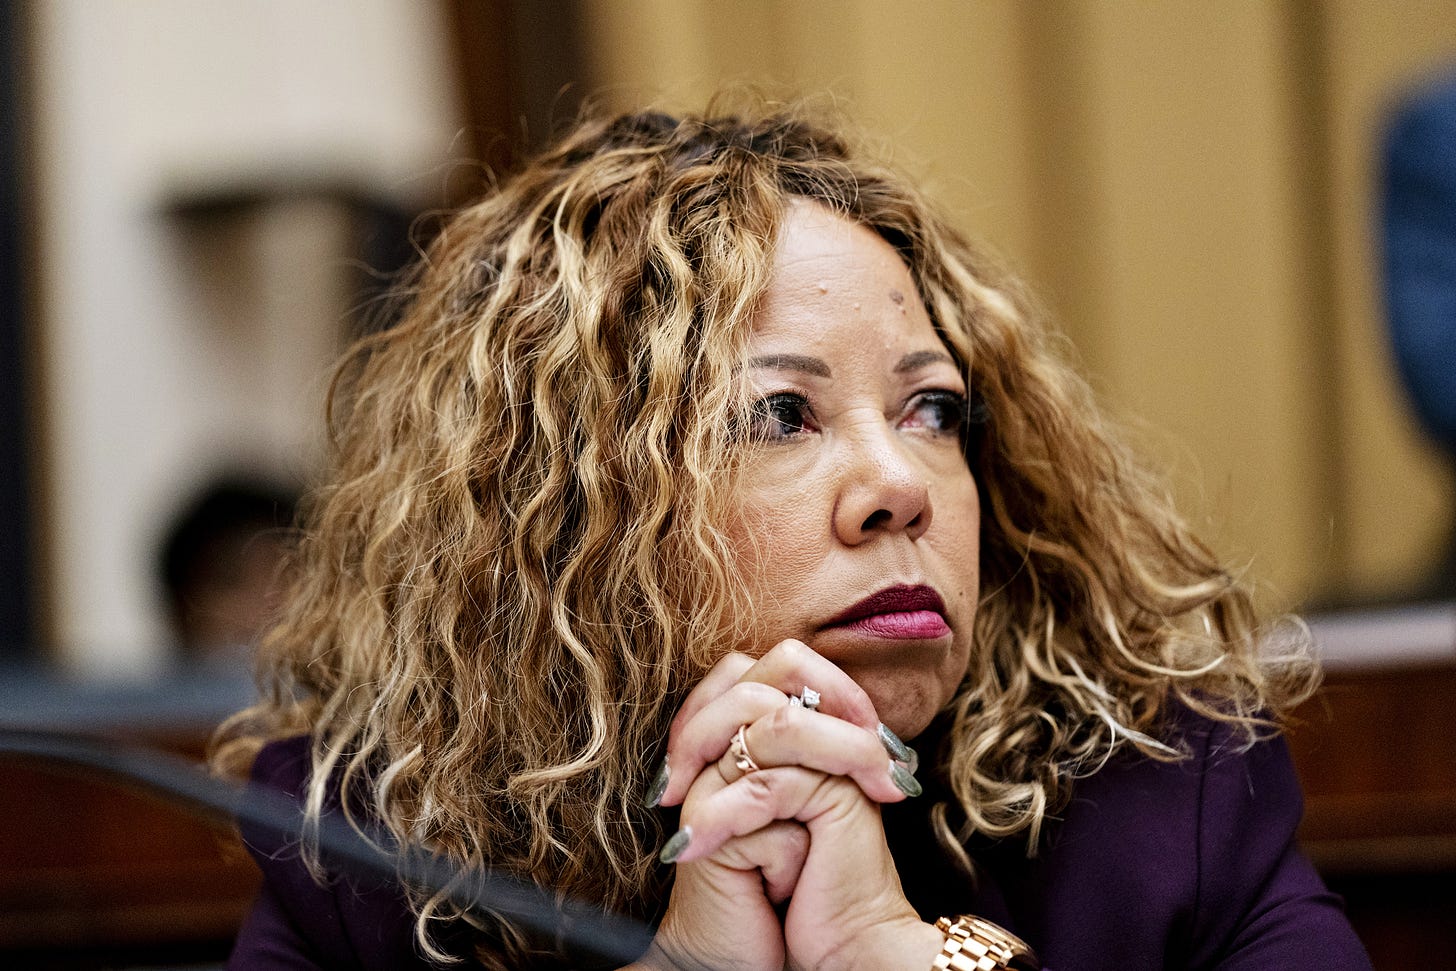 Lucy McBath, who lost her son to gun violence, plans to introduce red flag  law to Congress